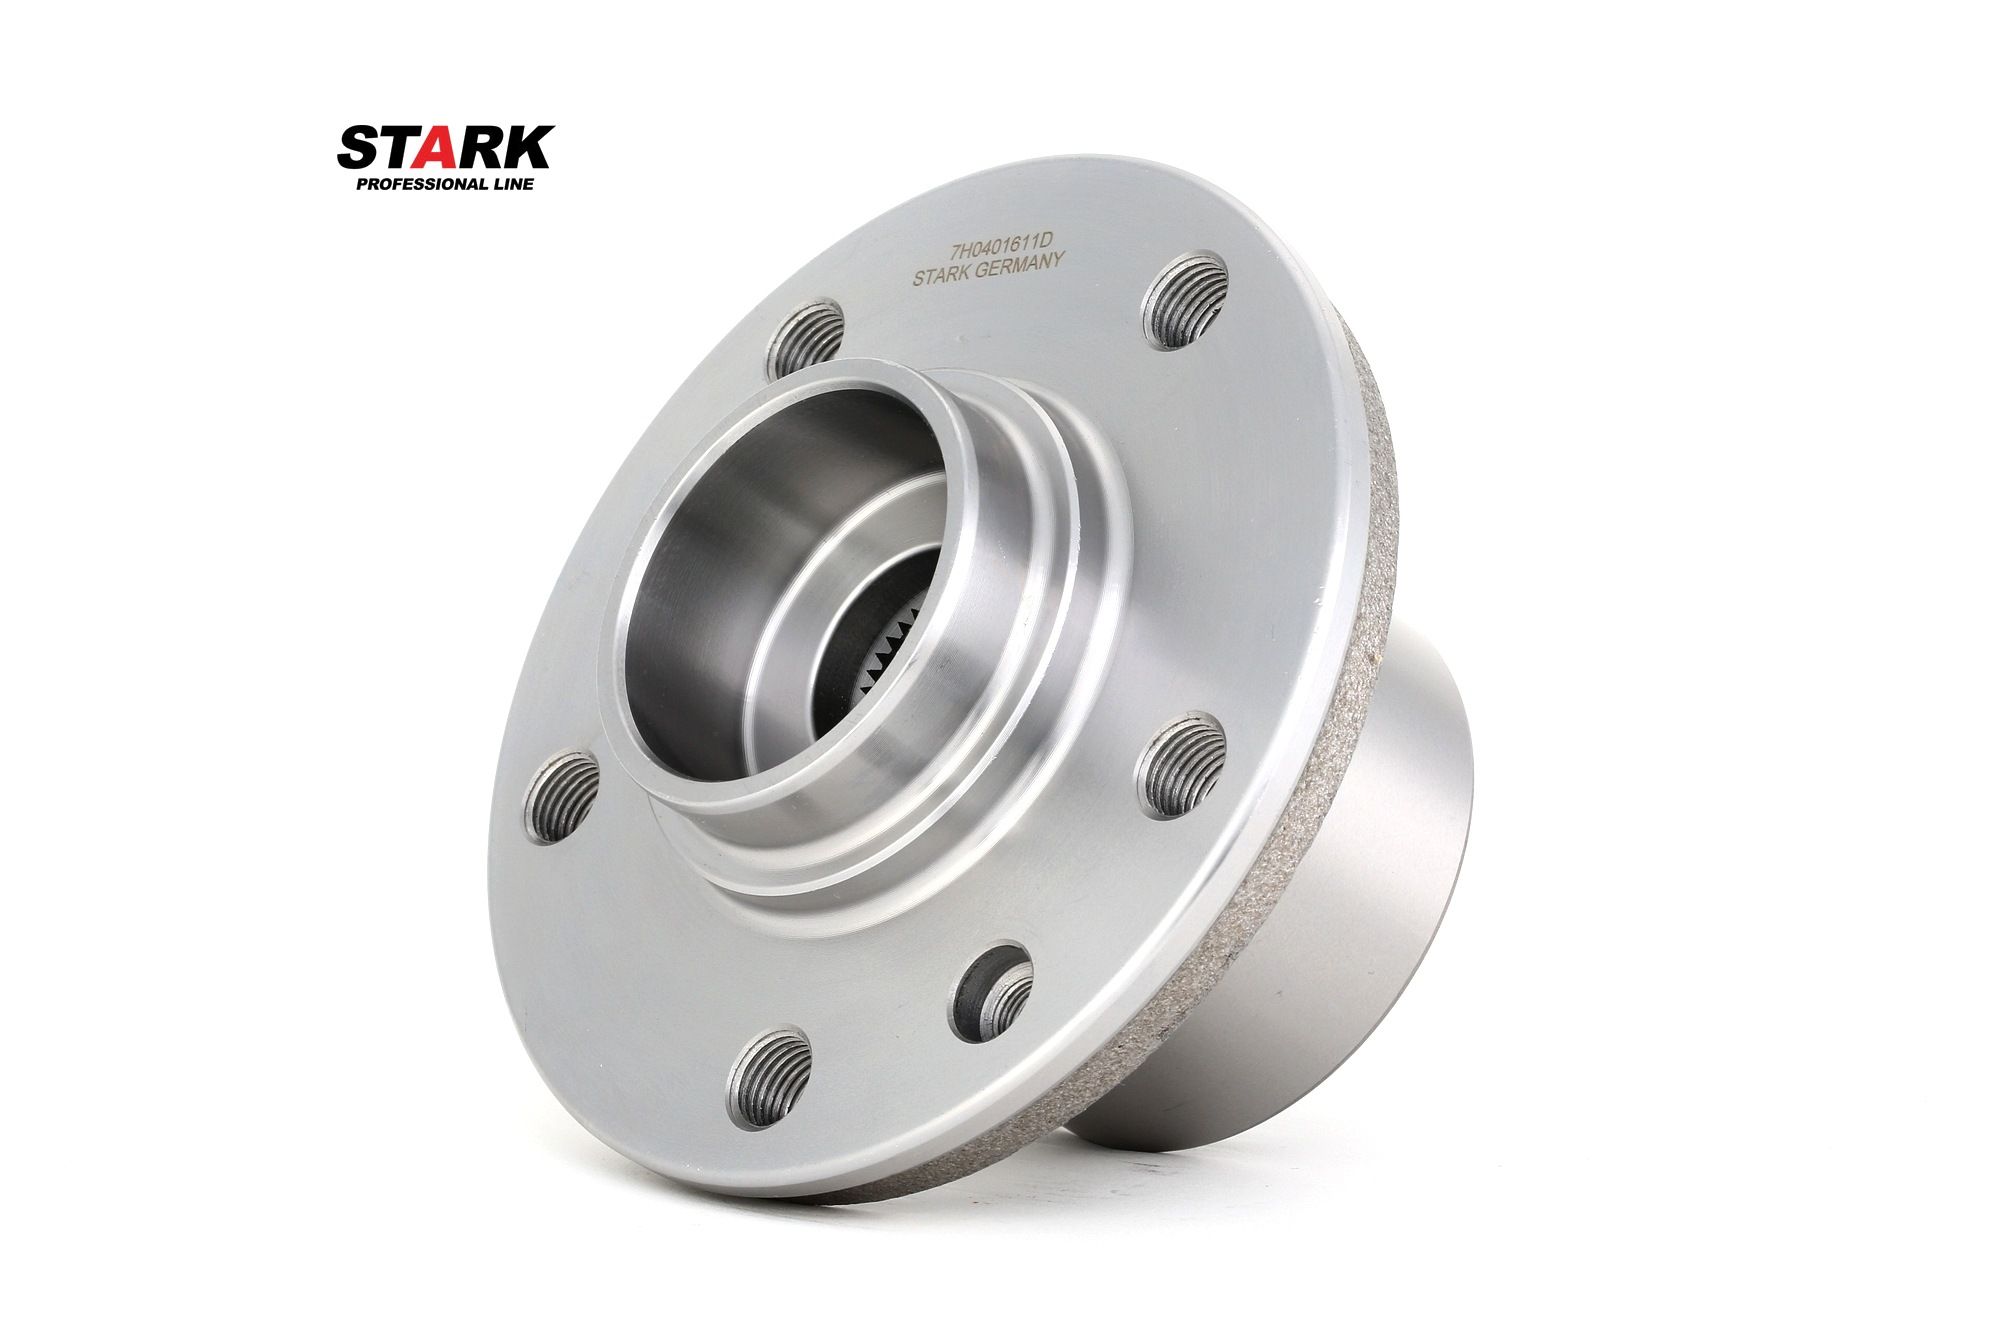 STARK SKWB-0180128 Wheel bearing kit with attachment material, with integrated wheel bearing, with wheel hub, 85 mm, Ball Bearing, Tapered Roller Bearing